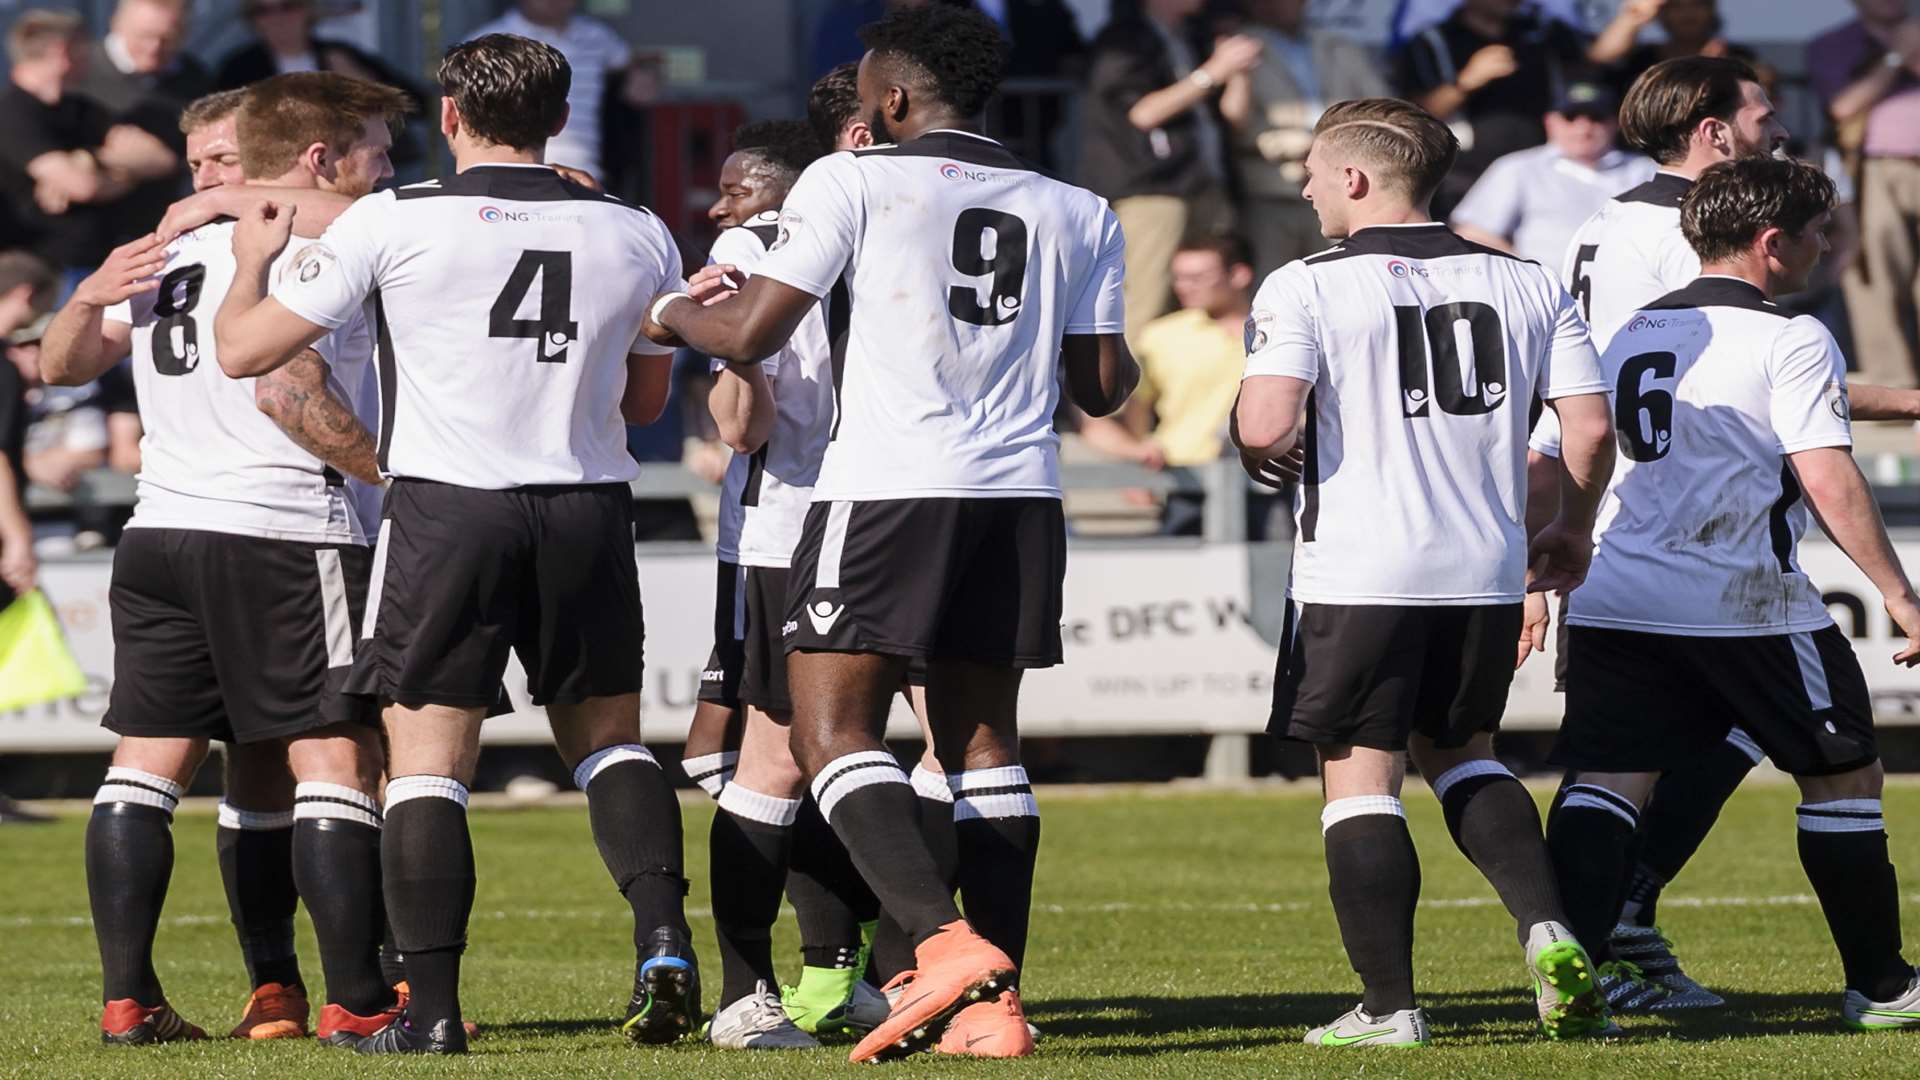 Dartford enjoyed an exciting win over Eastbourne last Saturday. Picture: Andy Payton